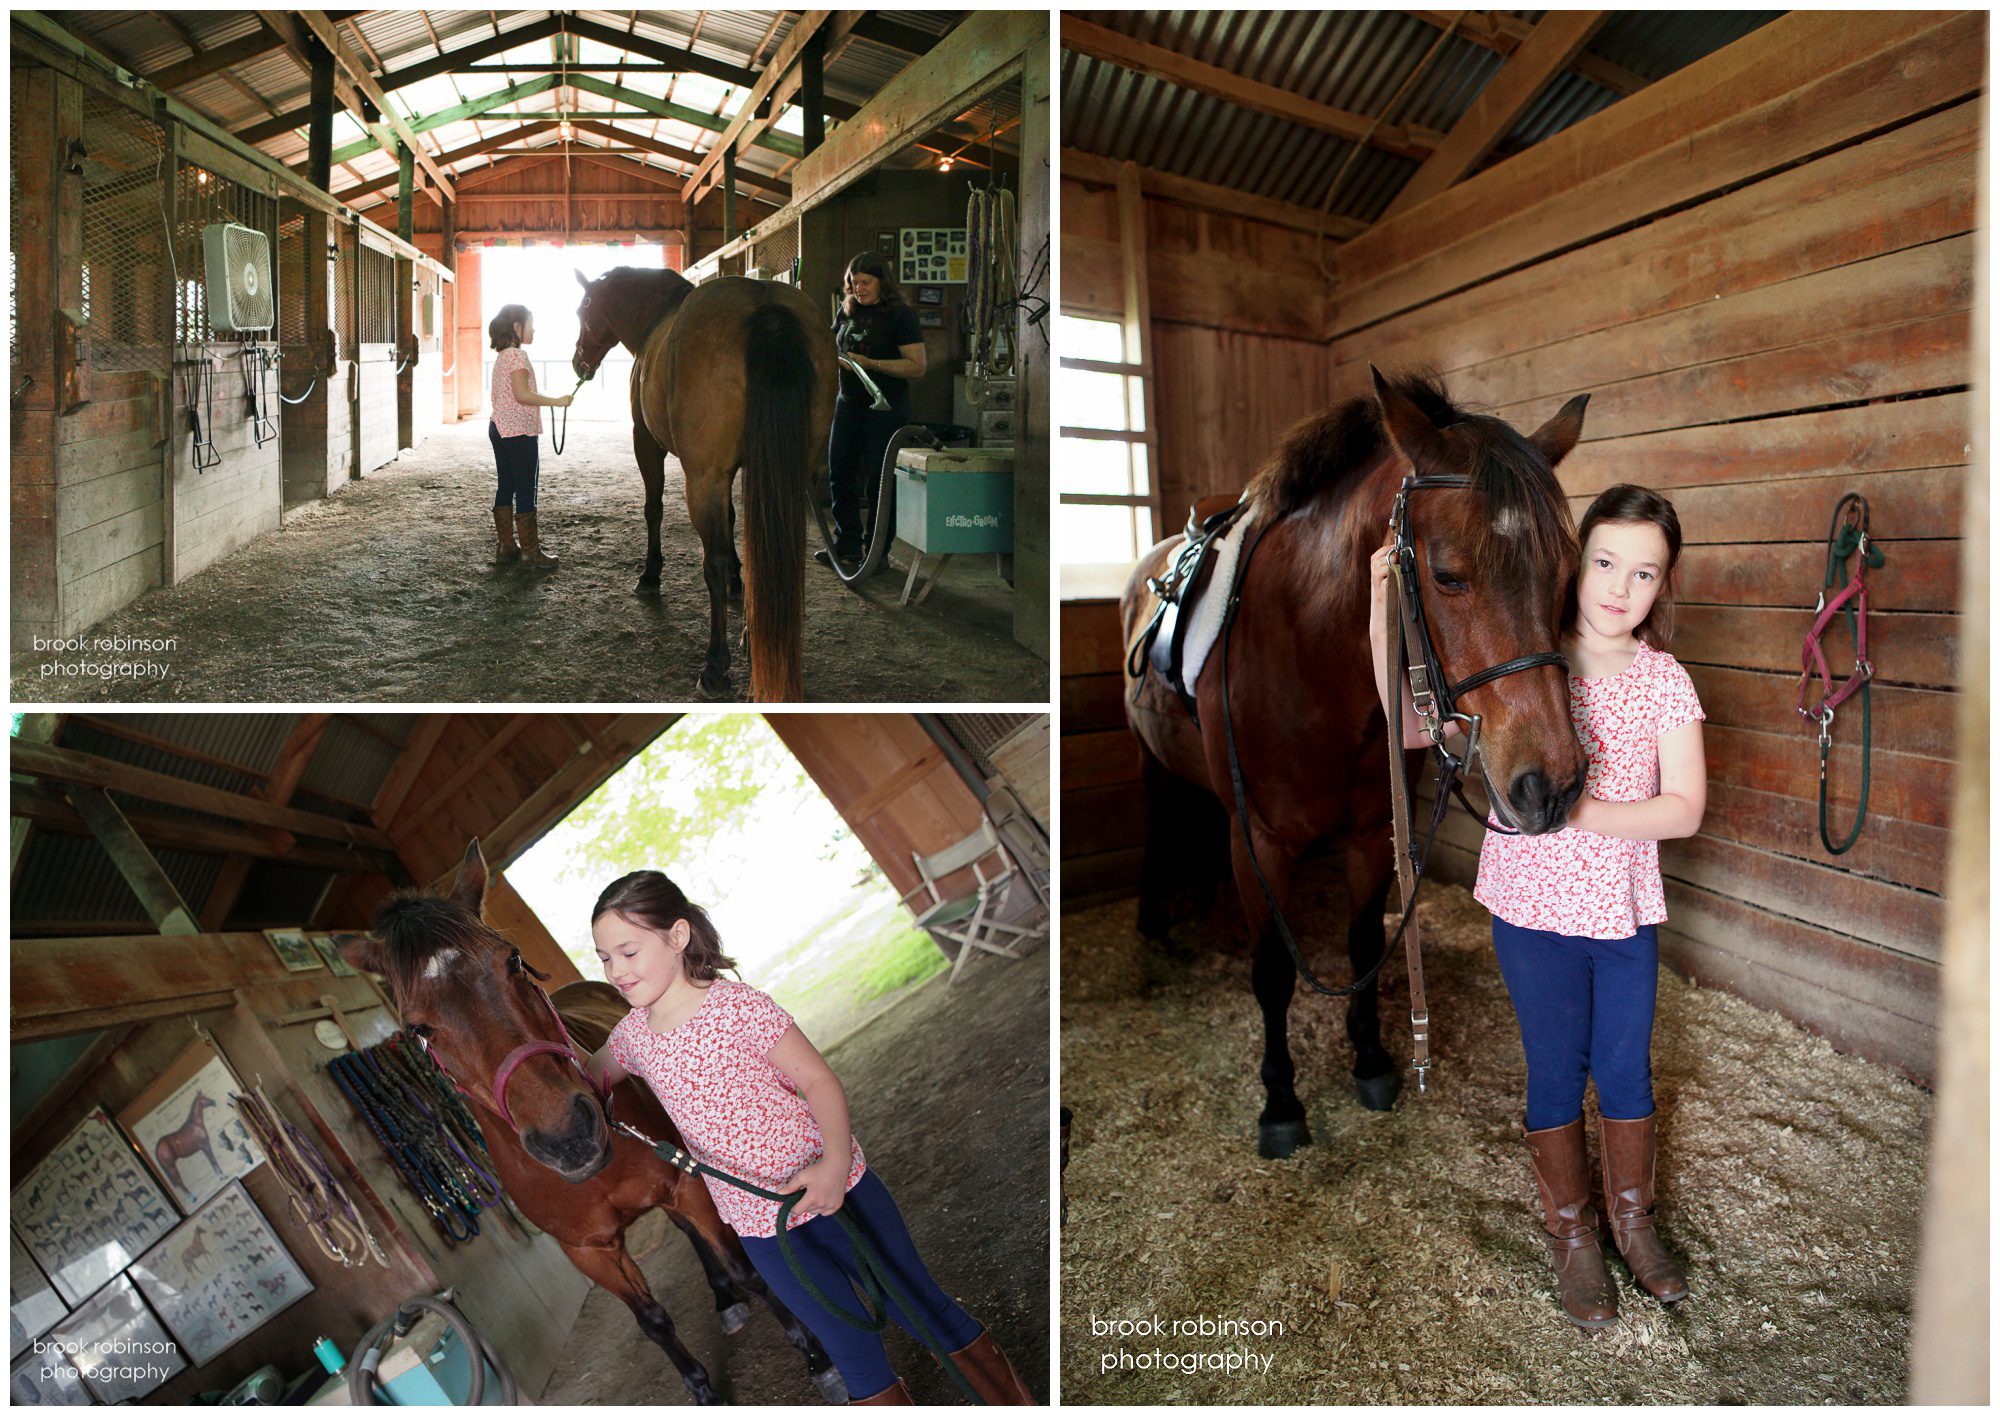 charlottesville horse photography portraits photographer horseback riding pictures lessons girls horses equine portrait pony academy alebmarle county central virginia